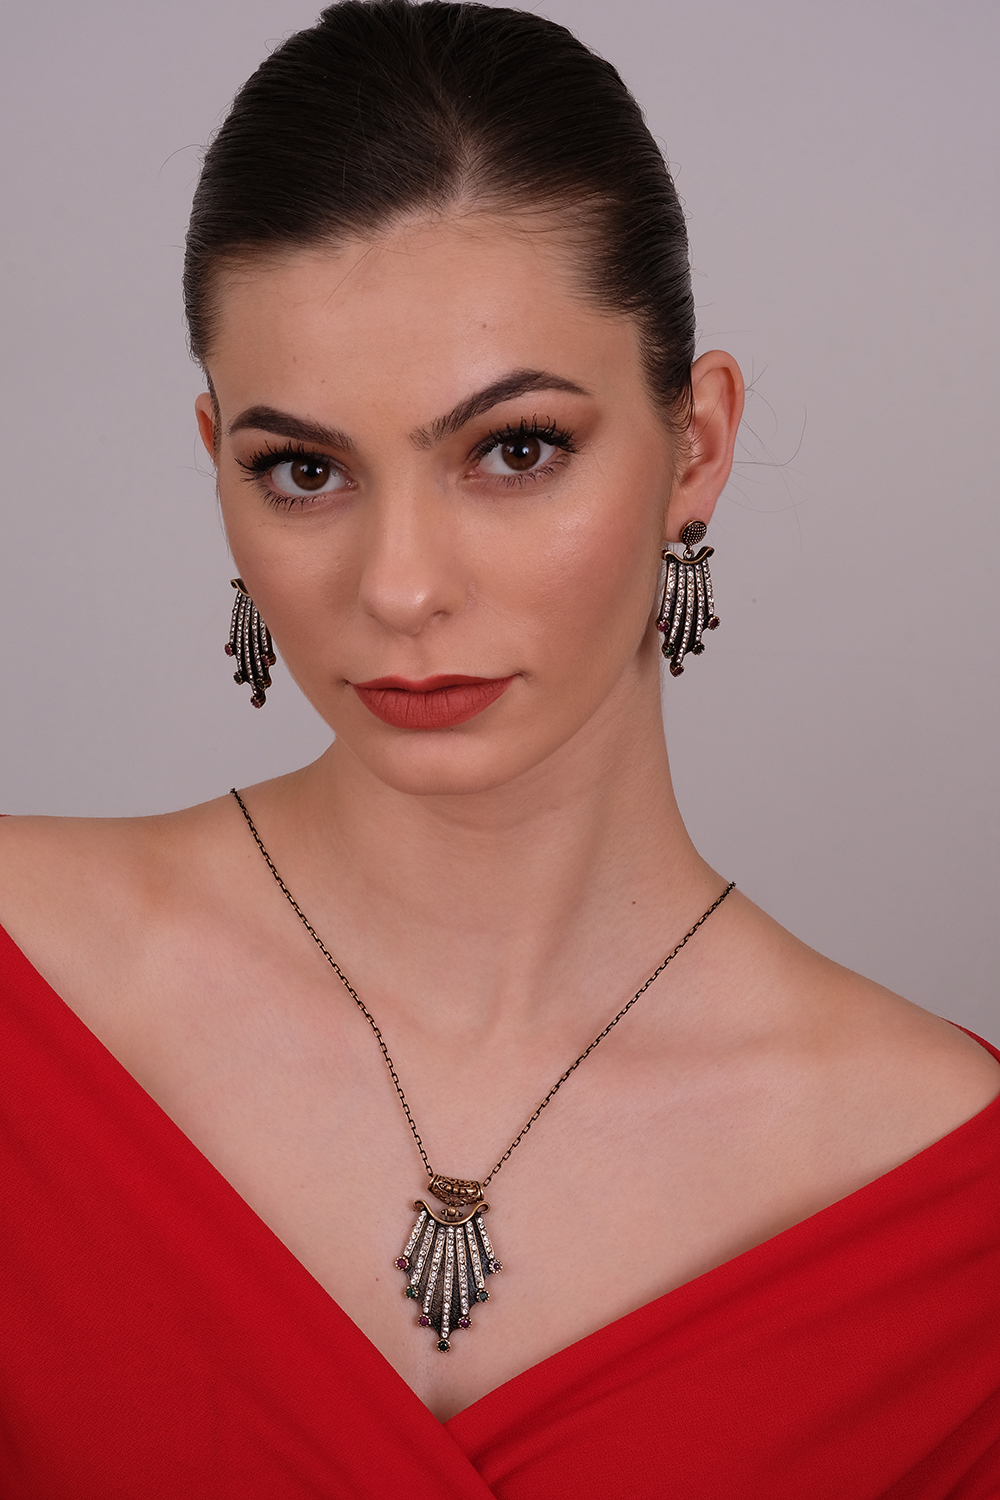 PERSIS Necklace and Earrings Jewelry Set